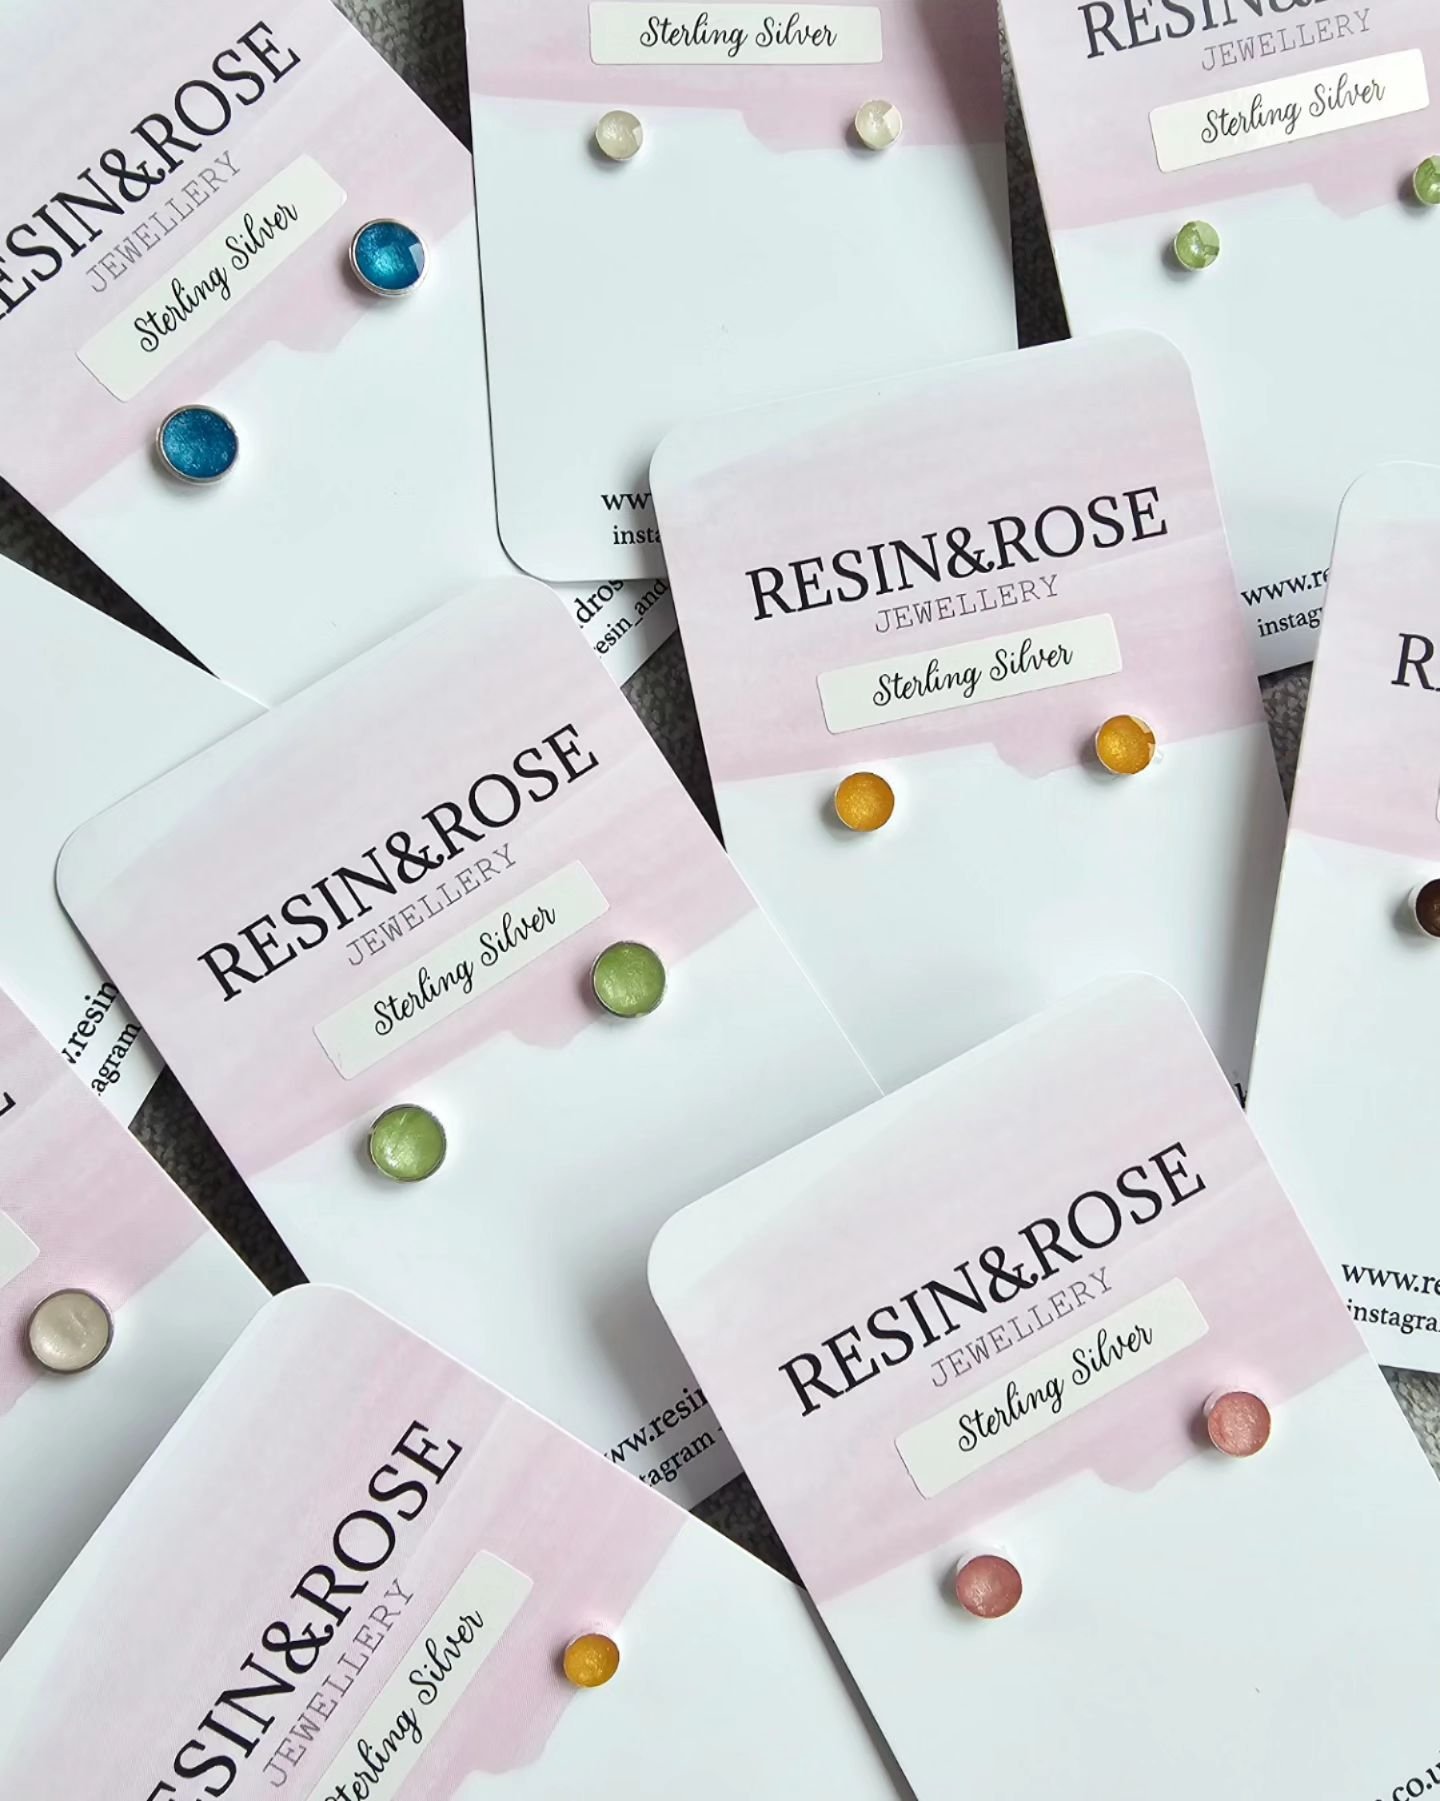 Super excited to share 🙌🏻 @resin_and_rose STERLING SILVER stud earrings made and ready to be delivered to the beautiful @handmadedesign.ashbourne 
.
In an array of colours that capture the essence of the stunning gift shop vibe ✨️ 
.
And also in St